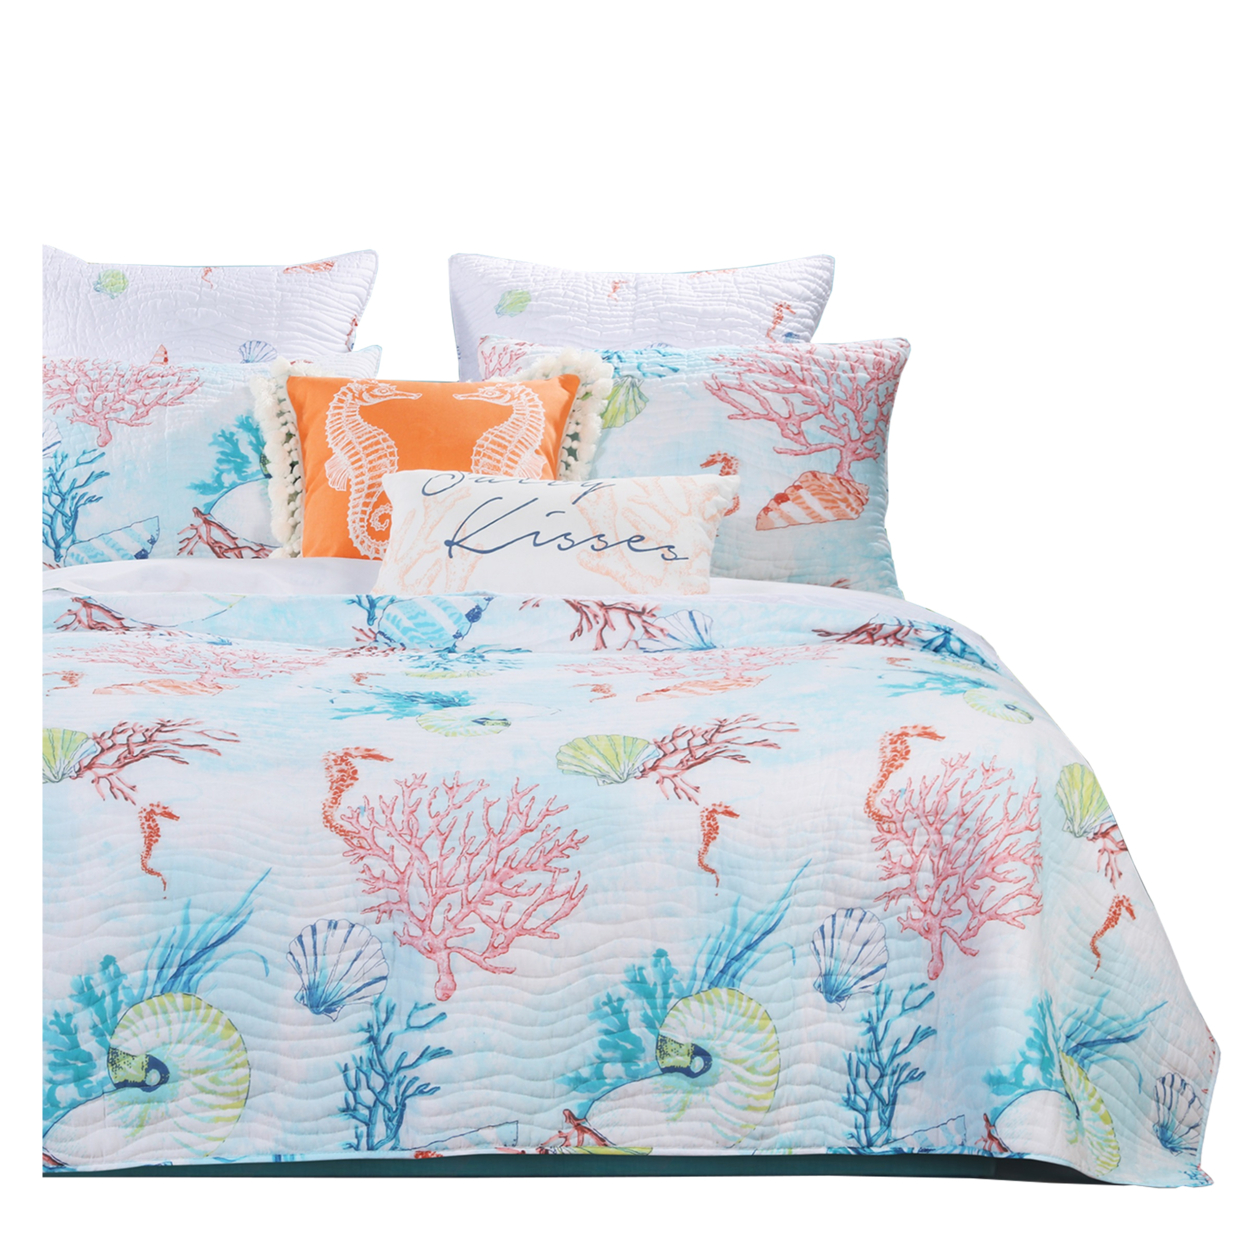 King Size 3 Piece Polyester Quilt Set With Coral Prints, Multicolor- Saltoro Sherpi